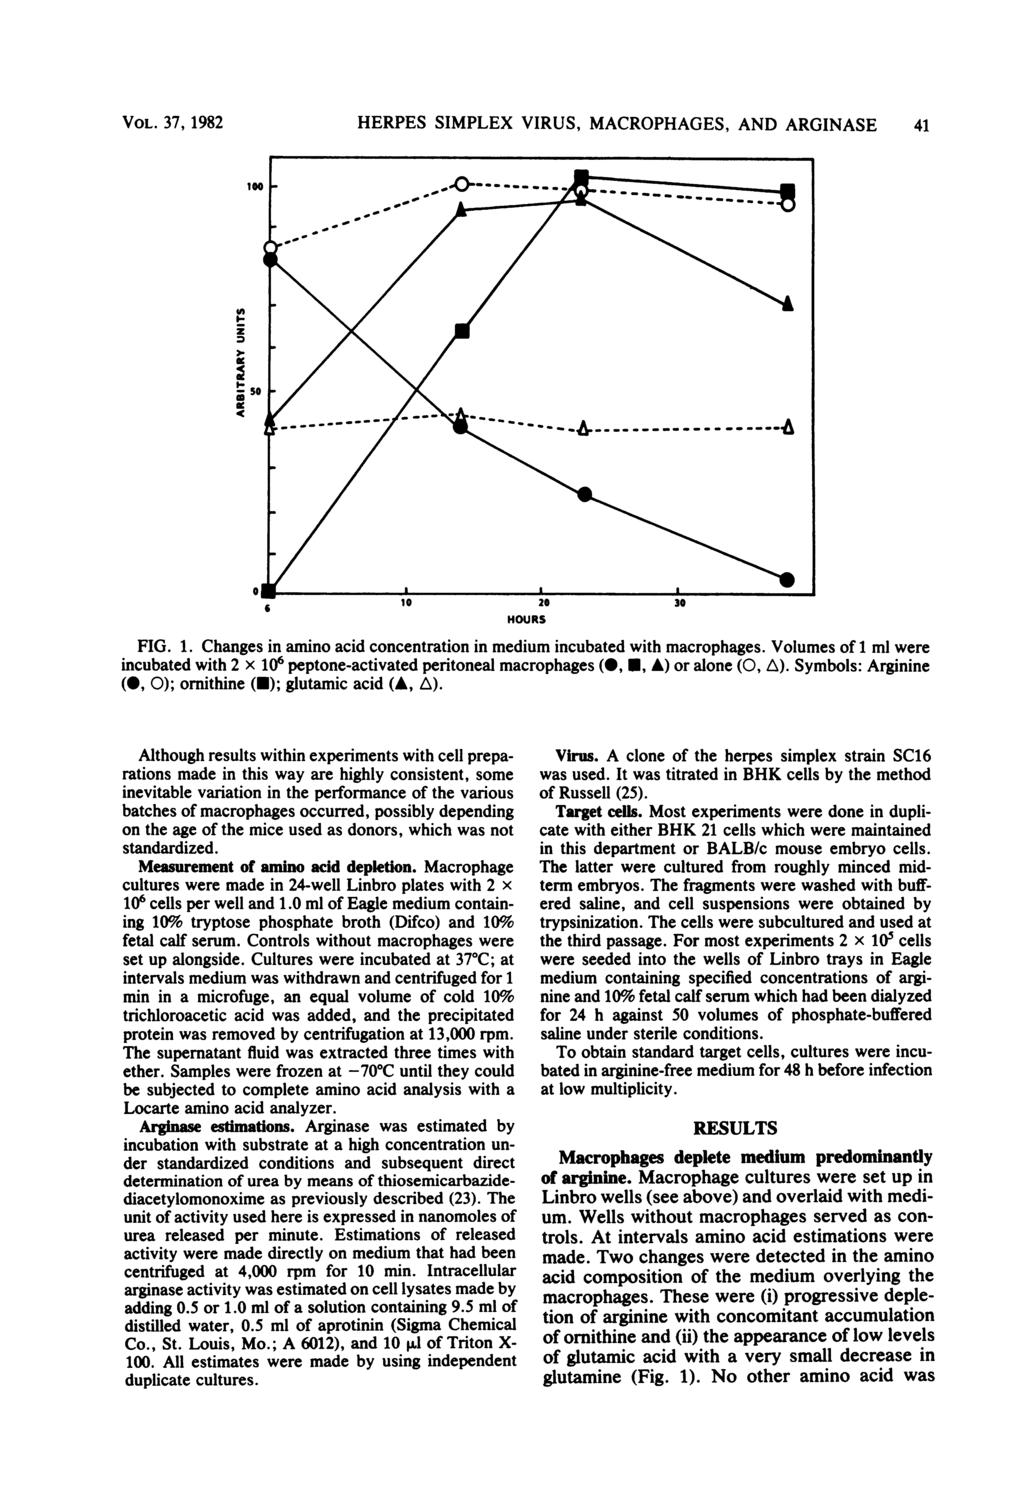 VOL. 37, 1982 HERPES SIMPLEX VIRUS, MACROPHAGES, AND ARGINASE 41 'A z )I- -oso < 10 20 30 HOURS FIG. 1. Changes in amino acid concentration in medium incubated with macrophages.